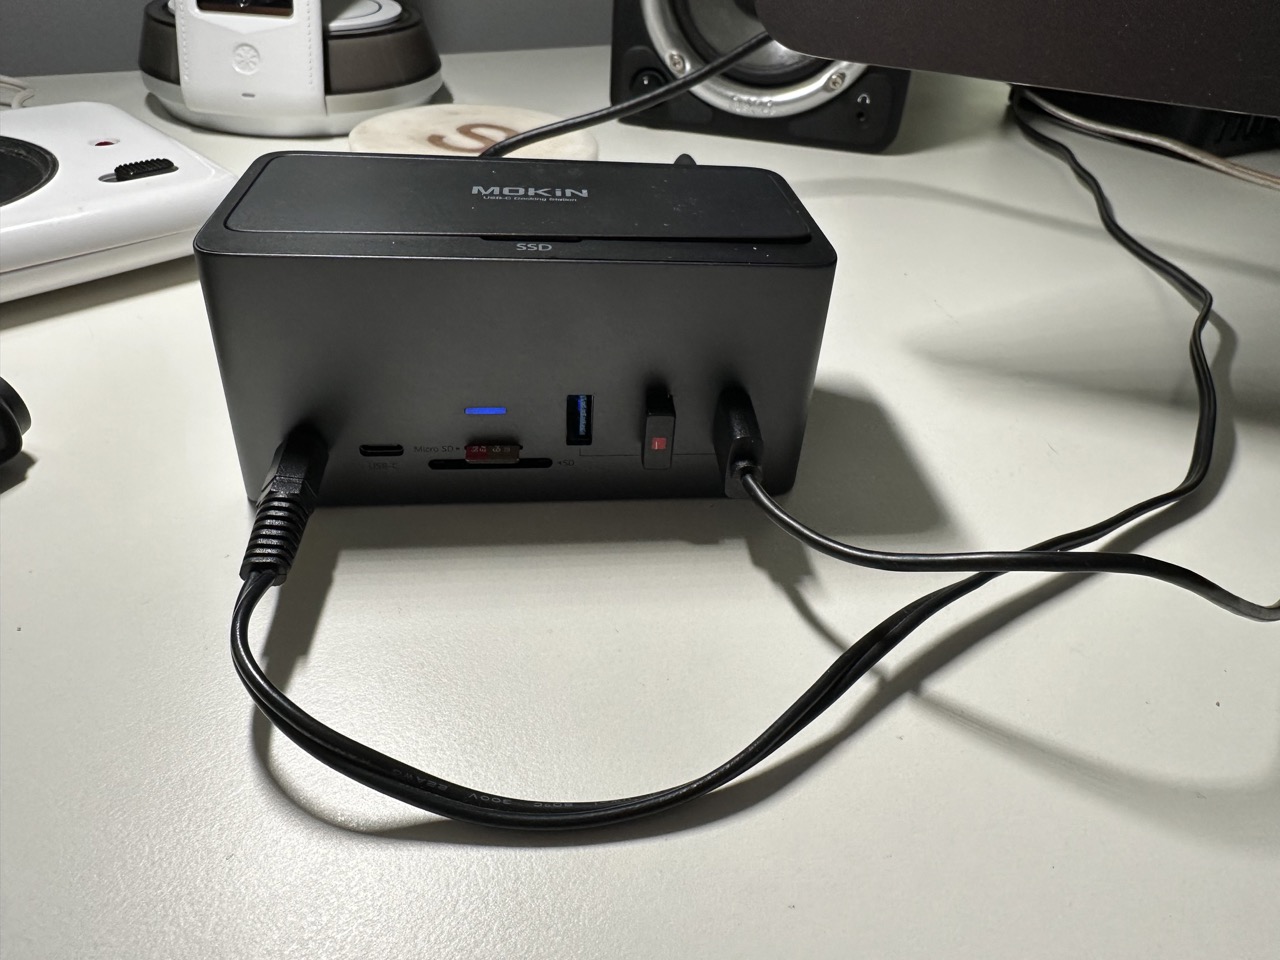 I bought a cheap USB-C docking station so you don't have to 7